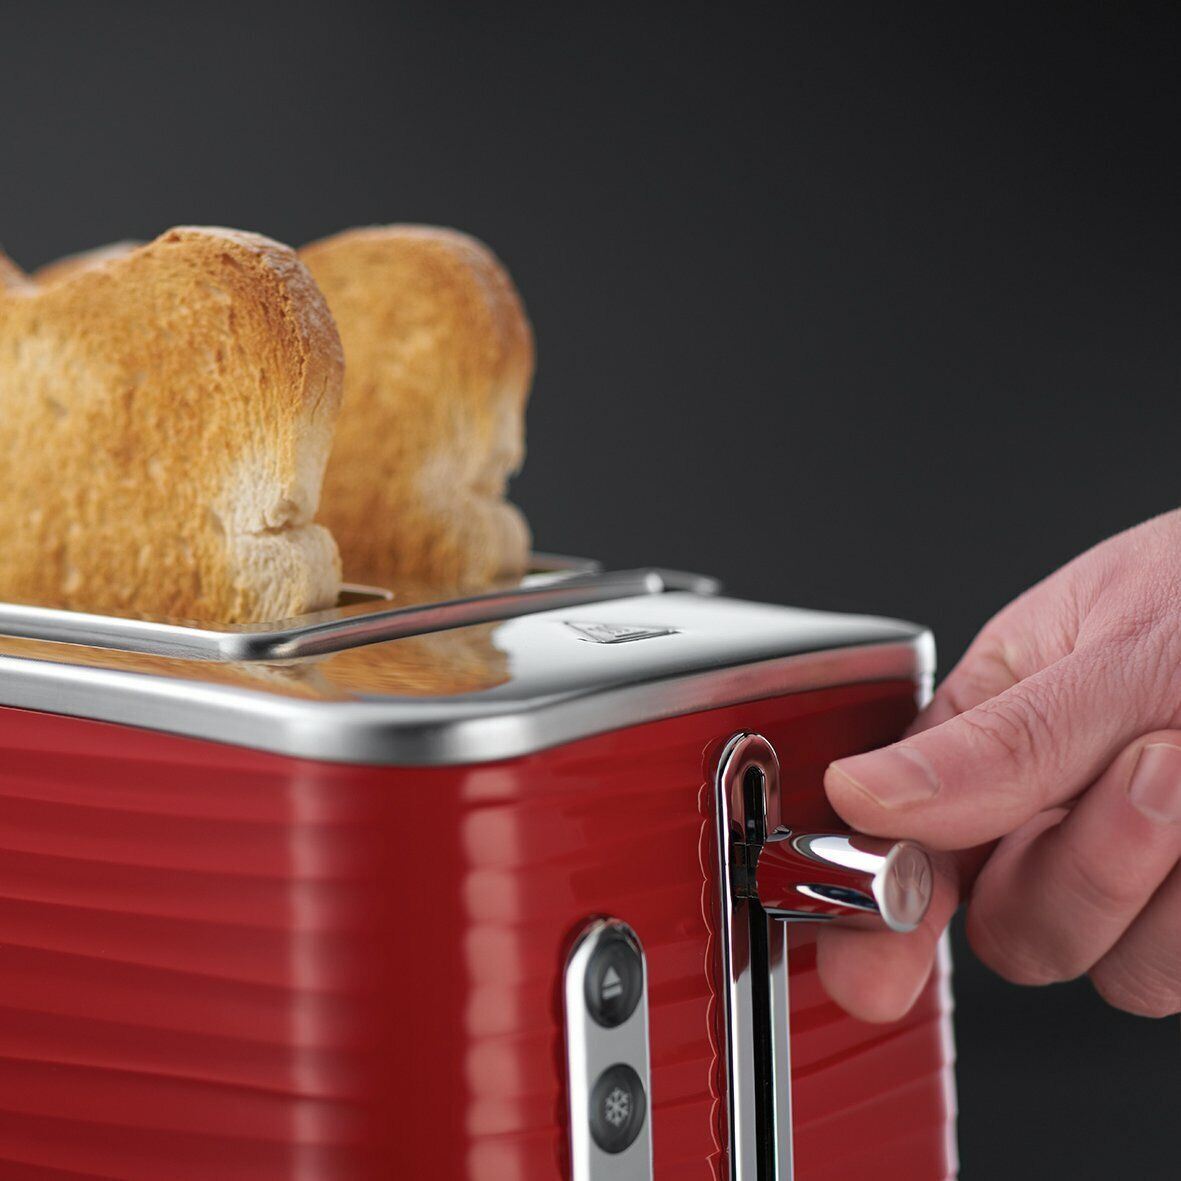 Russell Hobbs Inspire Red 2 Slice Toaster